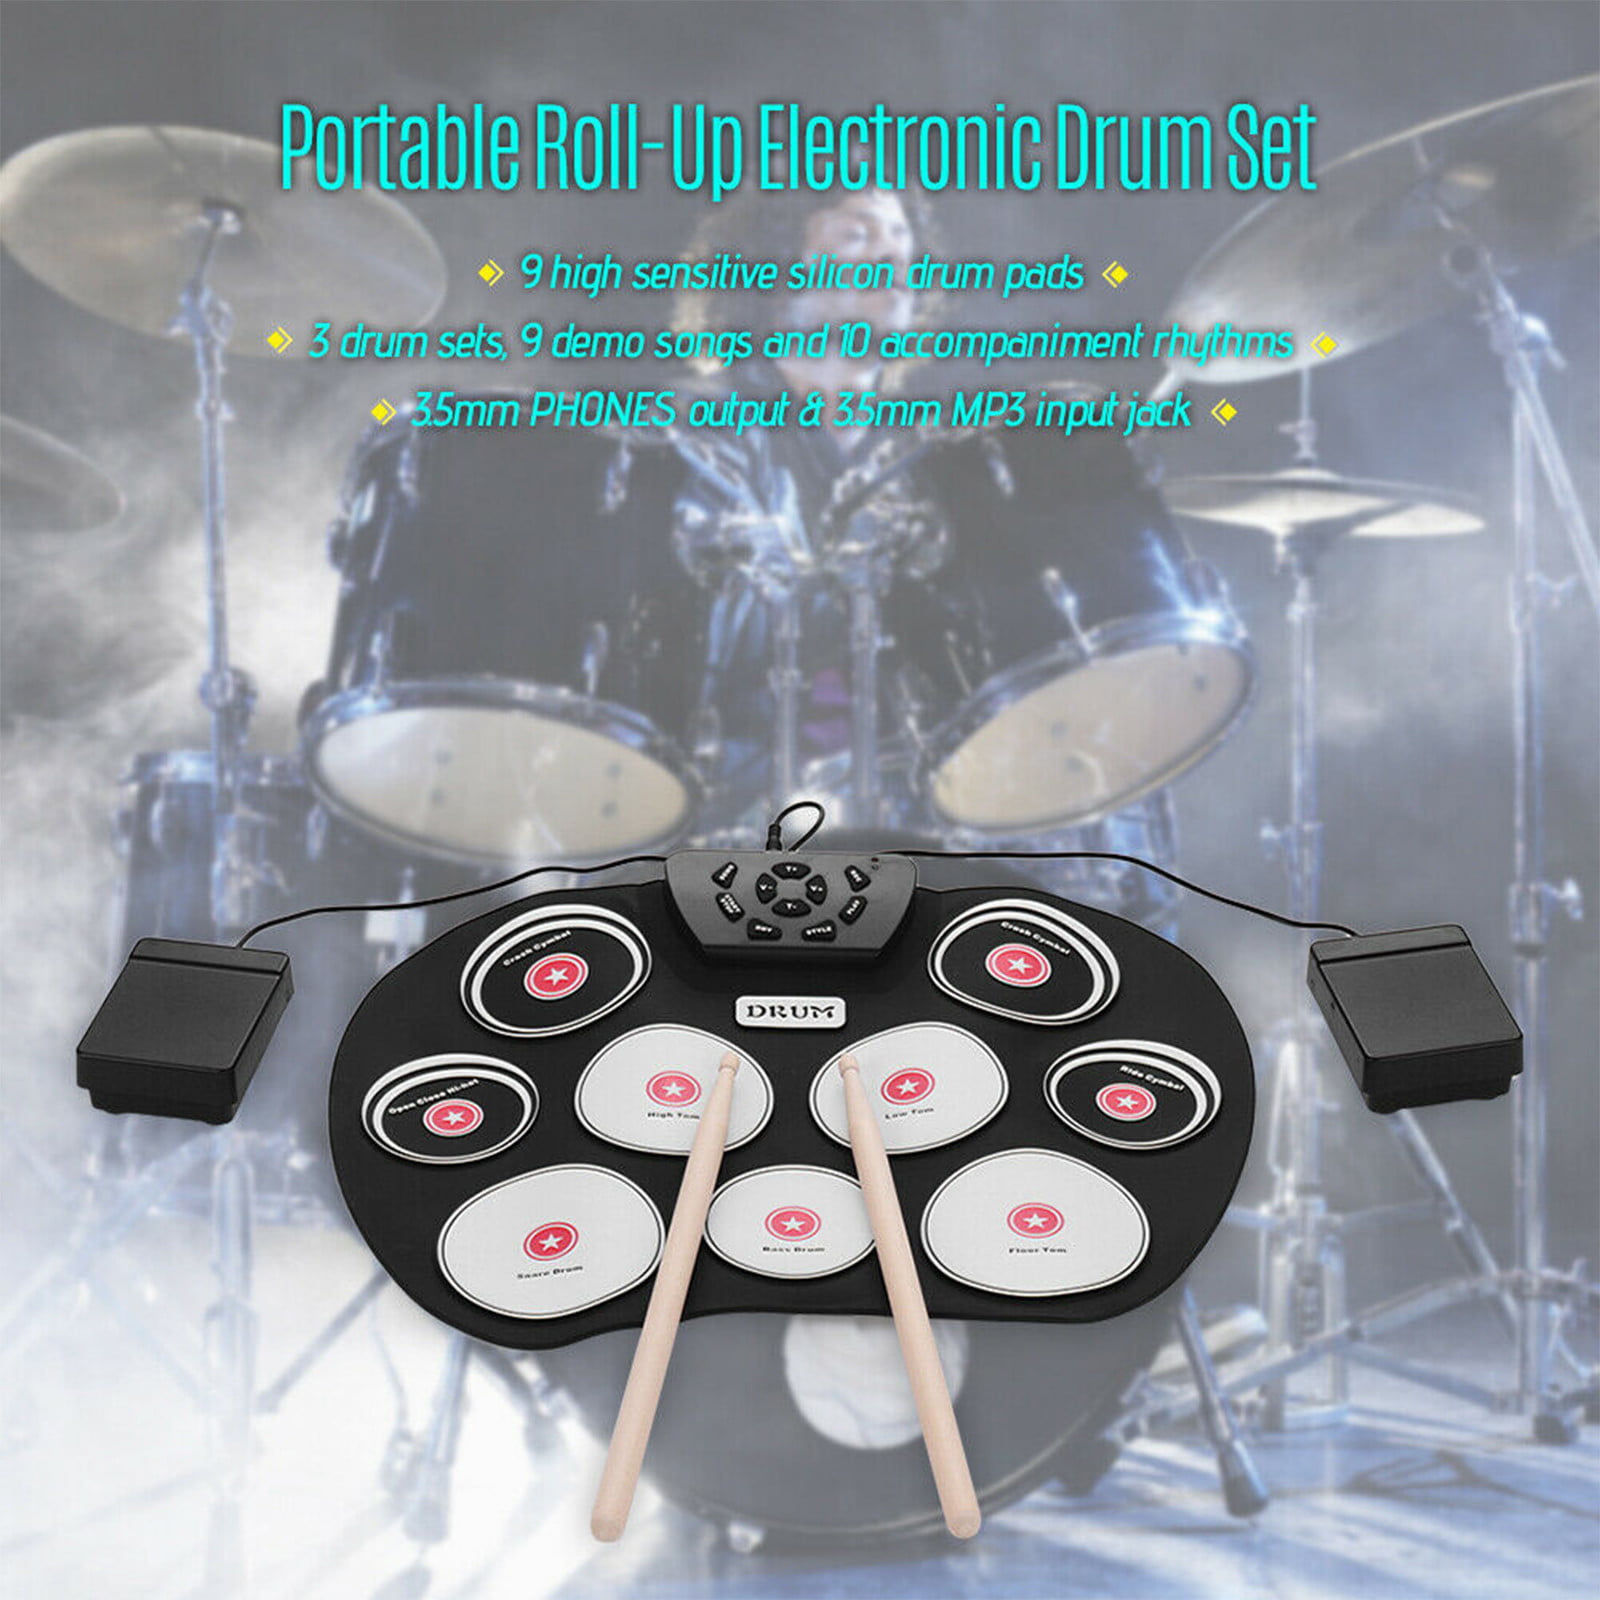 entertainment party instruments,Light Blue 7-key drum set suitable for beginners adults and children to practice drums portable folding two pedals Hand-rolled silicone folding drum set 